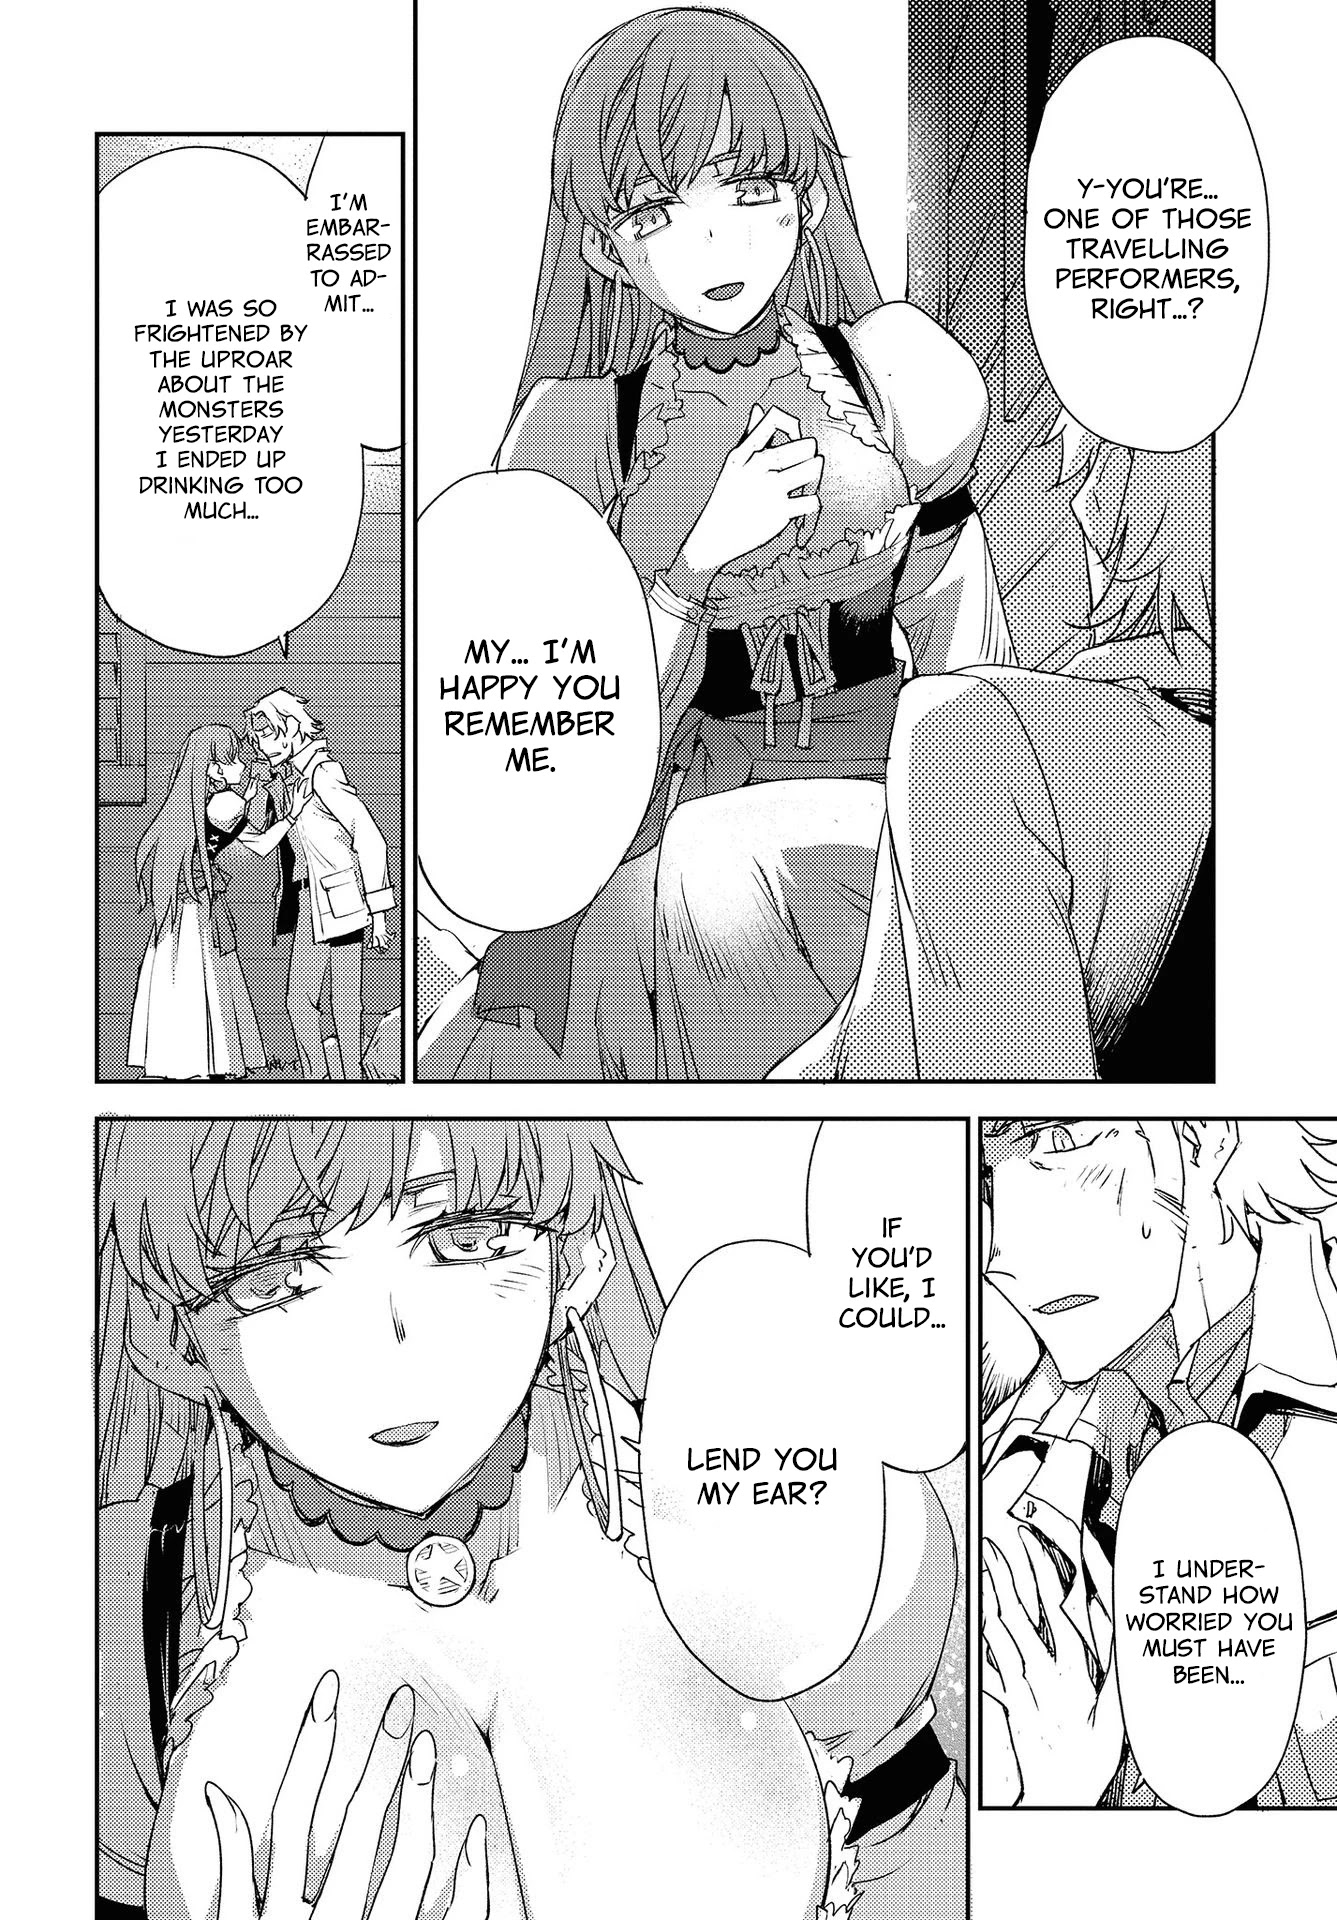 Fate/grand Order: Epic Of Remnant - Subspecies Singularity Iv: Taboo Advent Salem: Salem Of Heresy - Page 2